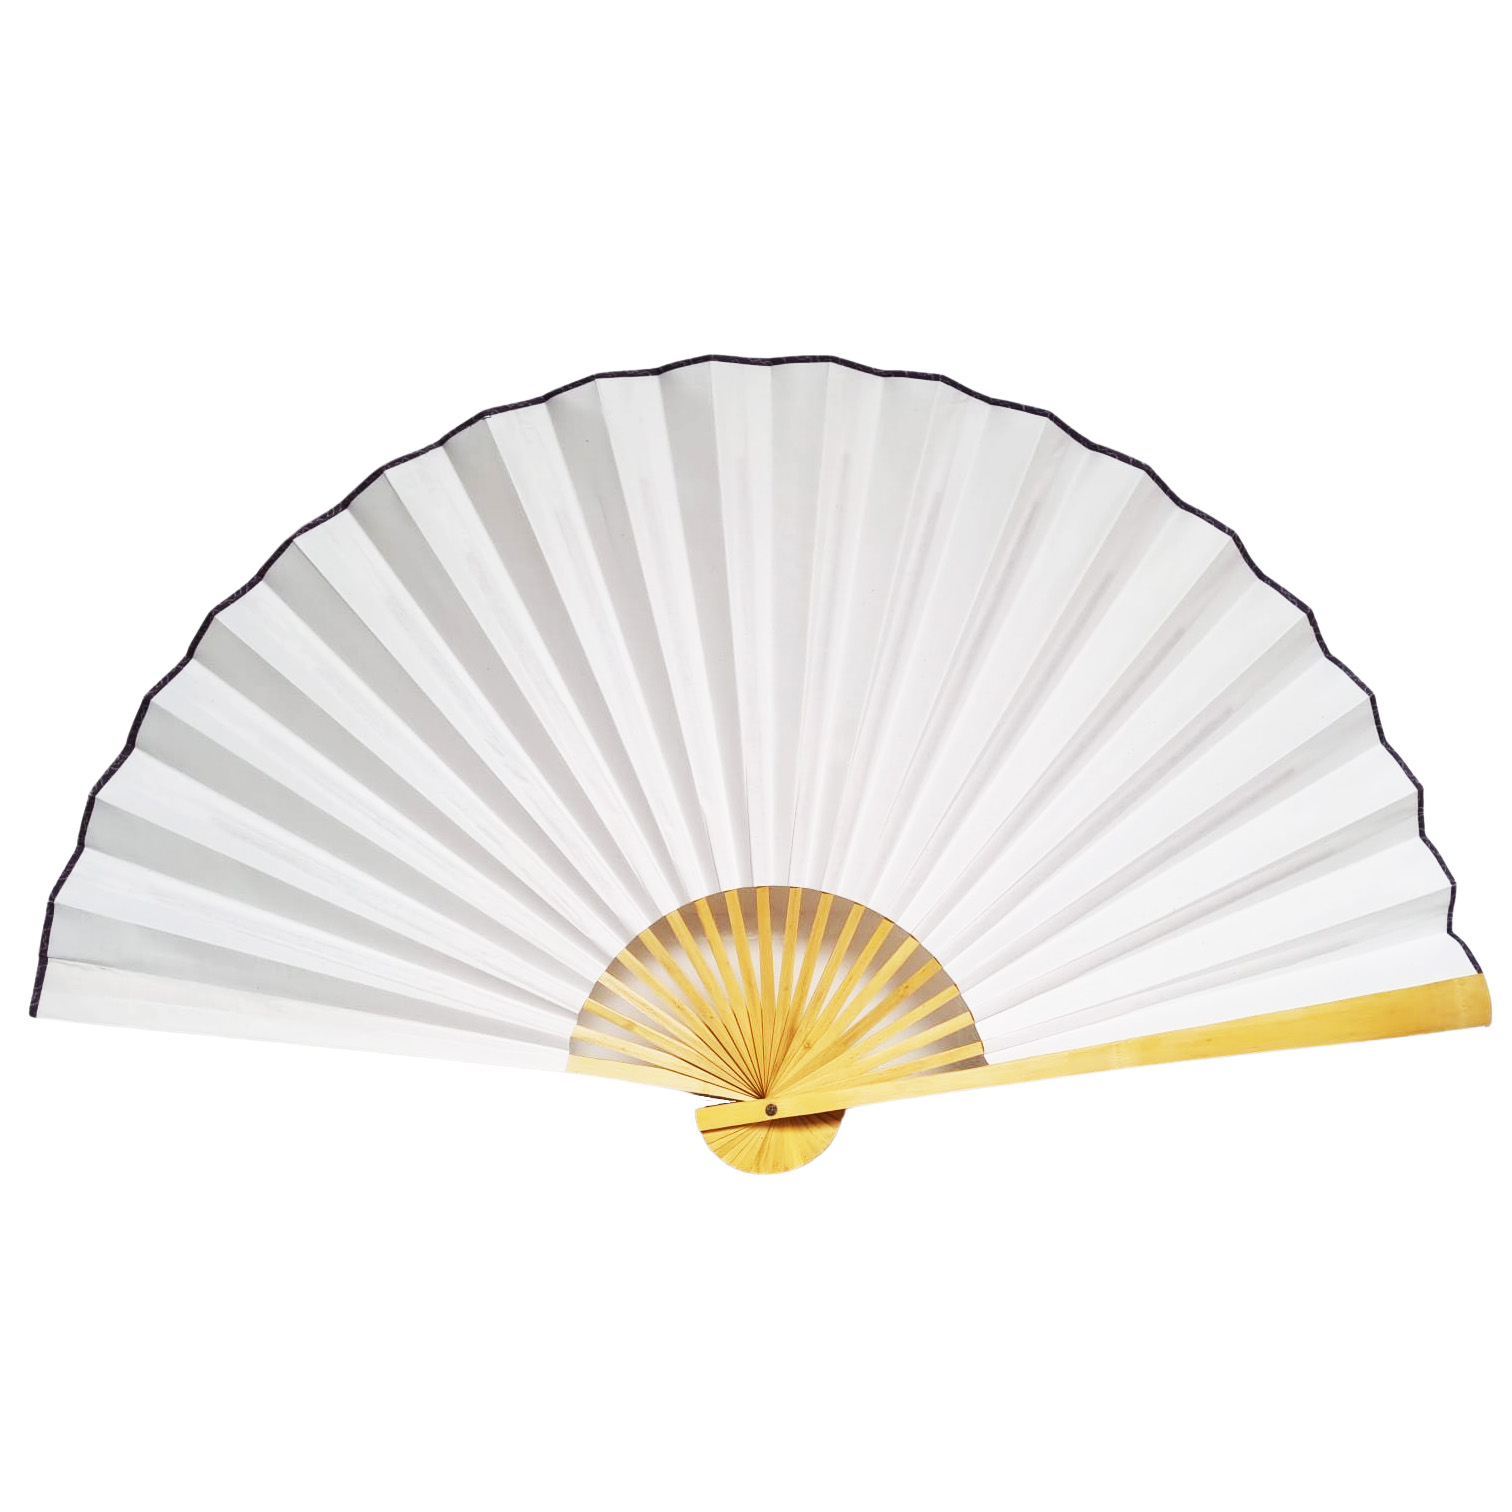 Chinese fan for air displacement sauna